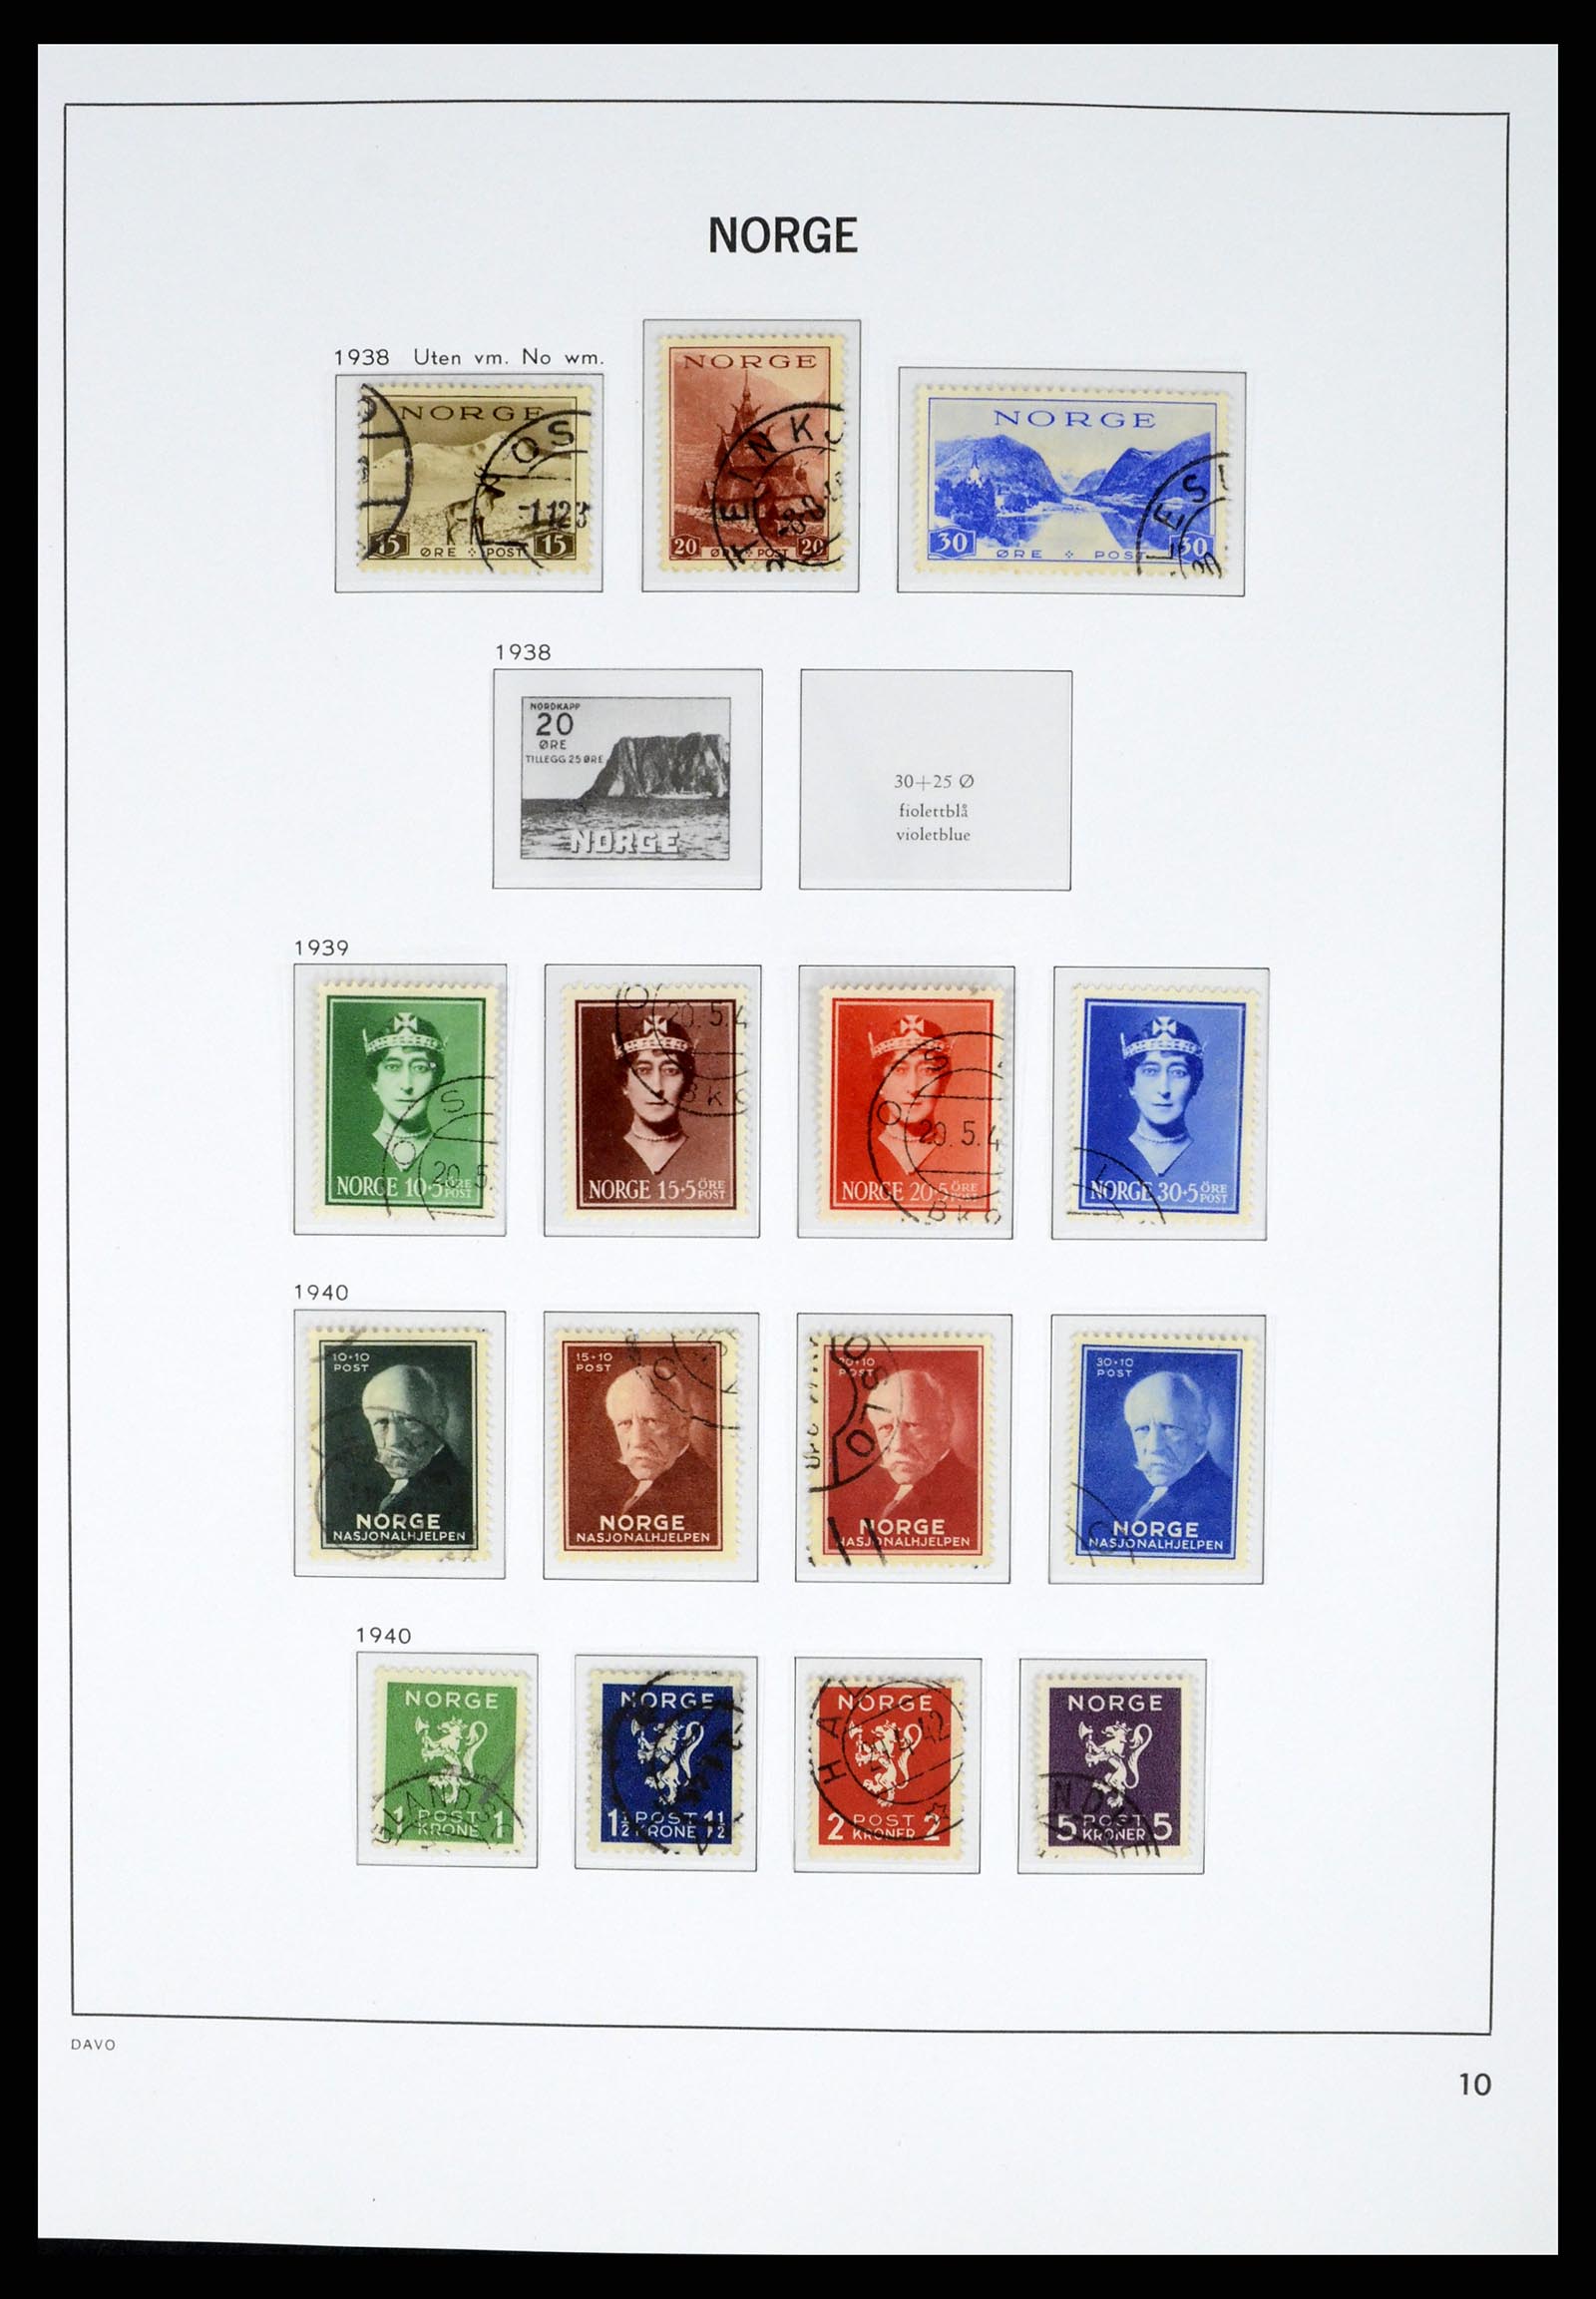 37381 011 - Stamp collection 37381 Norway 1855-1969.